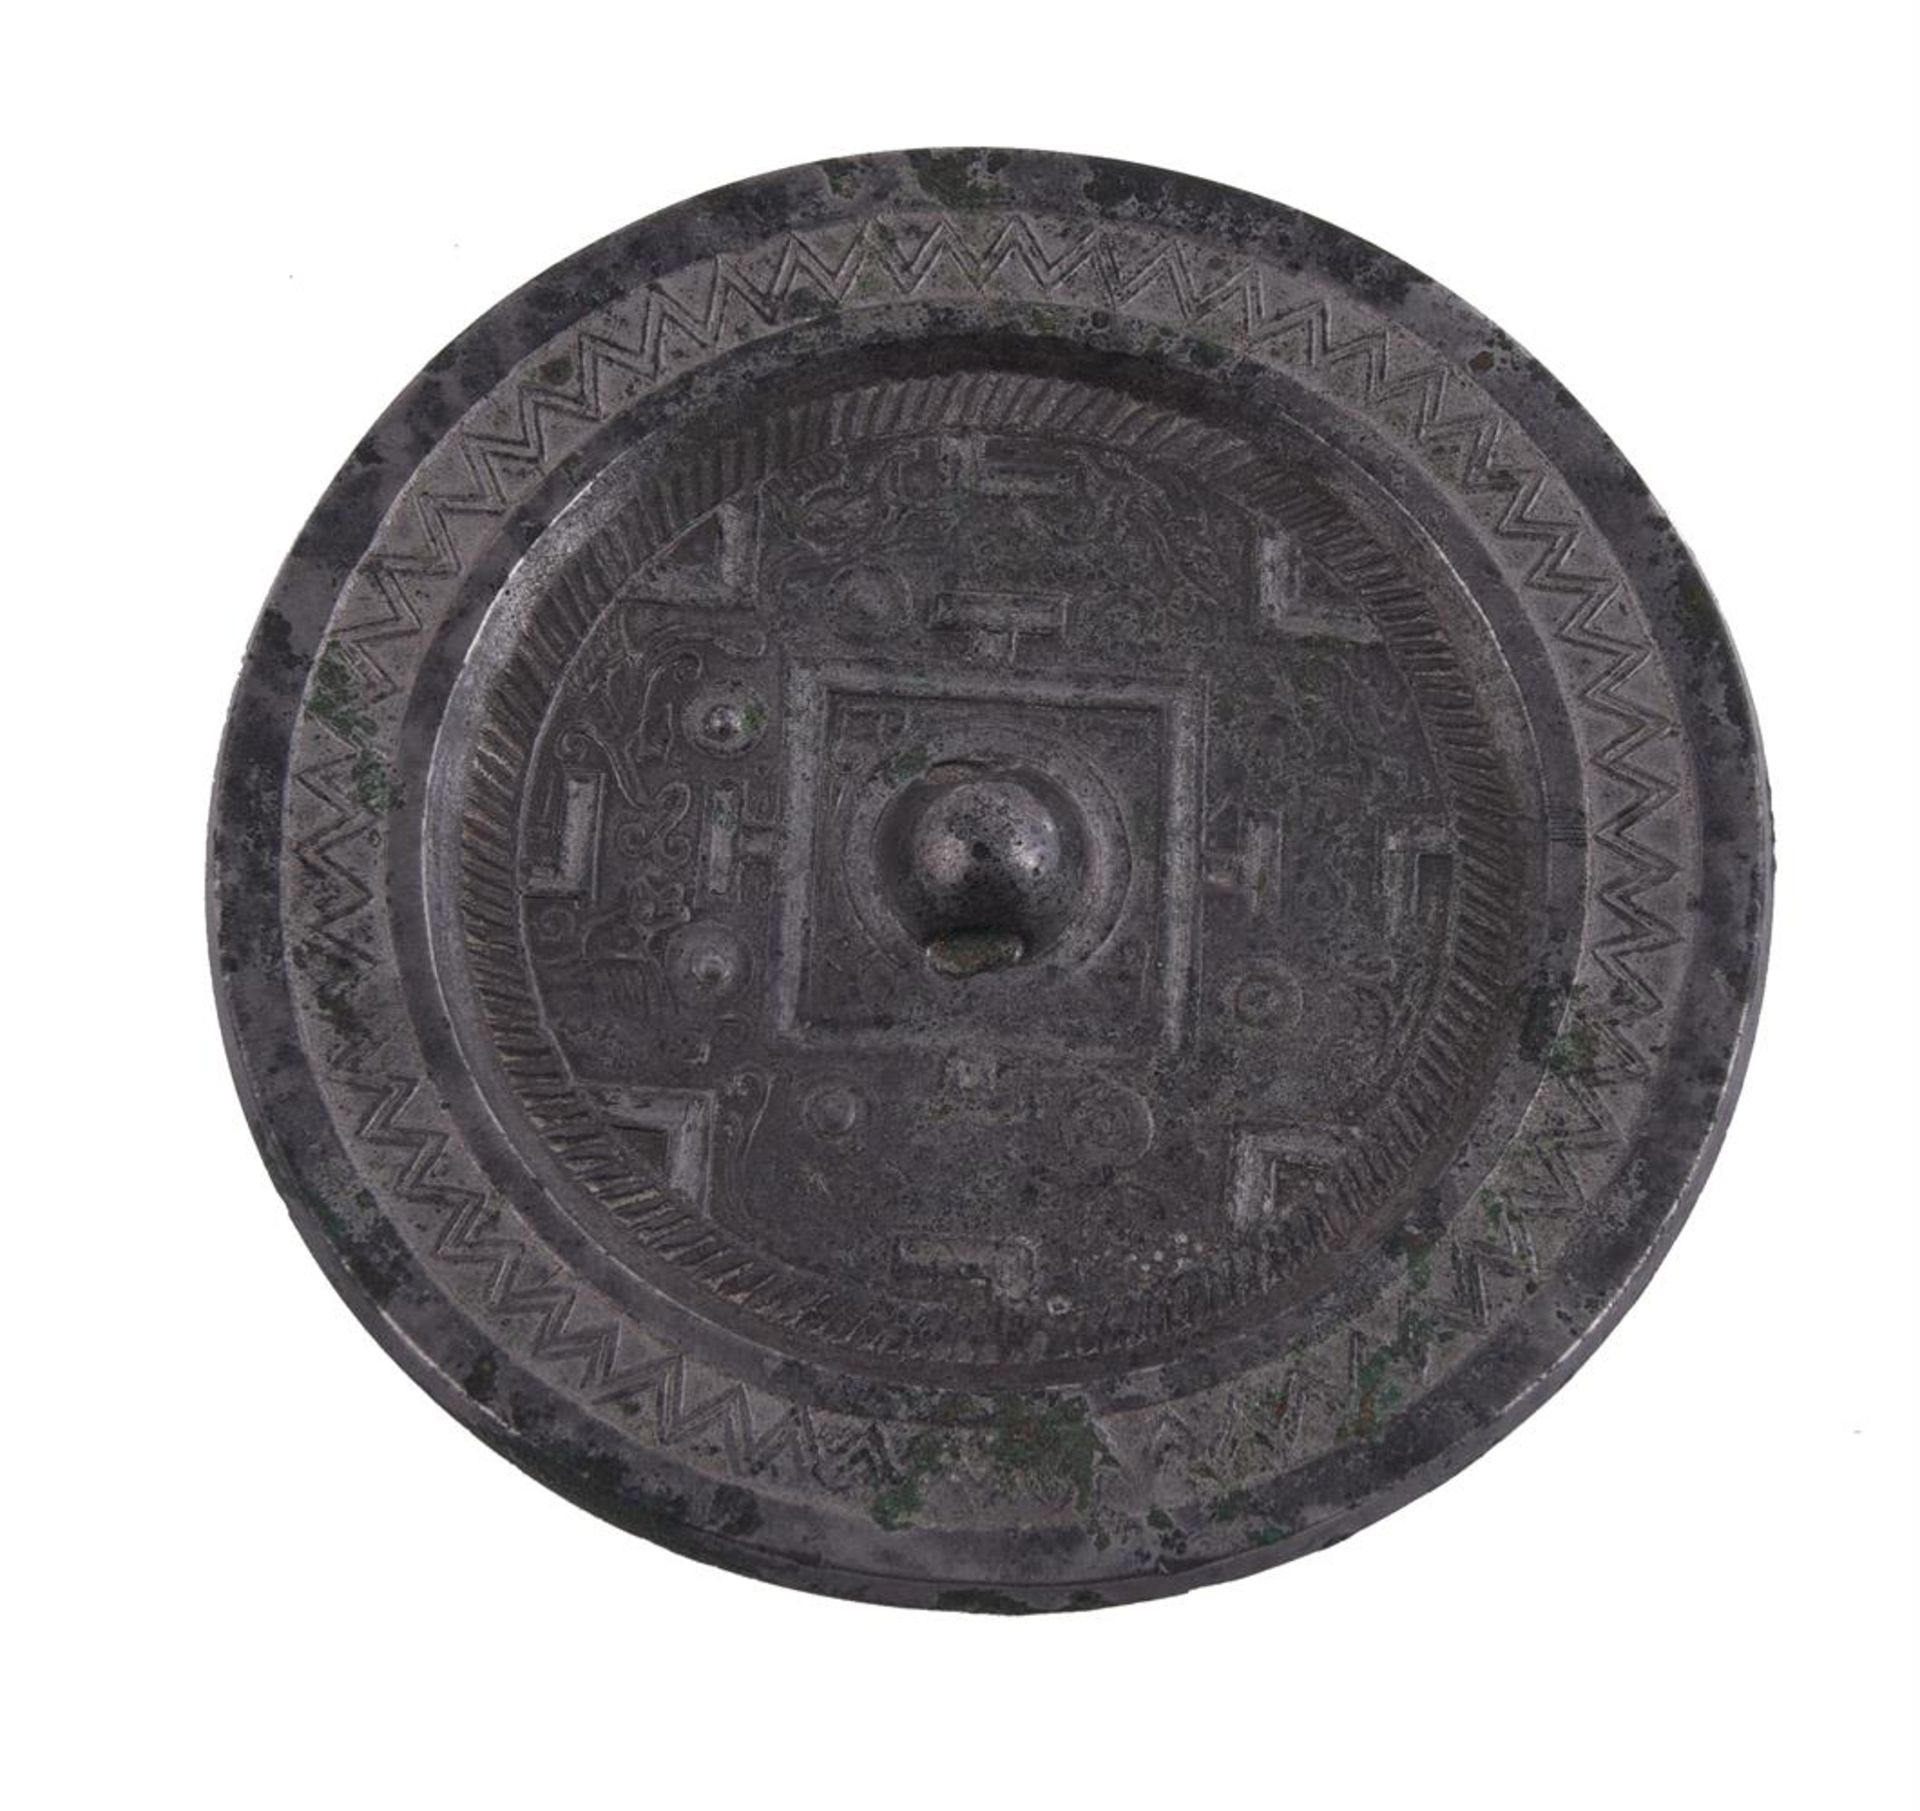 A Chinese silver-coloured bronze mirror